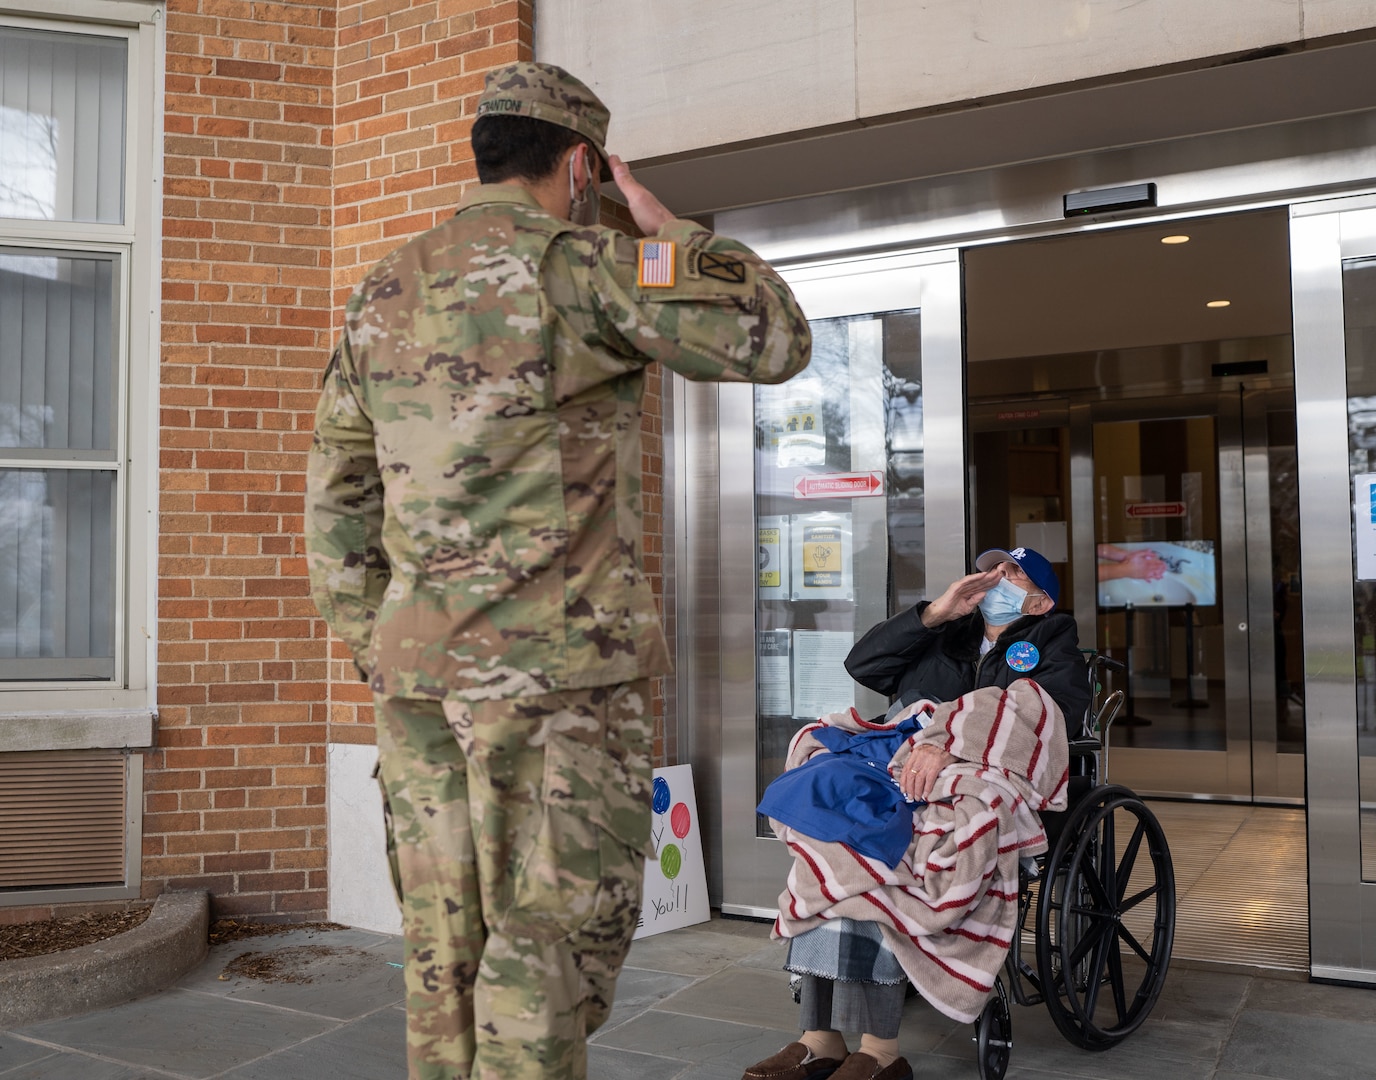 U.S. Army Staff Sgt. Jonathan Pietrantoni, assigned to the 53rd Troop Command, New York Army National Guard, salutes World War II veteran Pfc. Joseph Casaburi on his 99th birthday after he survived a three-month long battle with COVID-19 at the nursing home Angus on Hudson, Hastings-on-Hudson, N.Y., on Dec. 8, 2020.